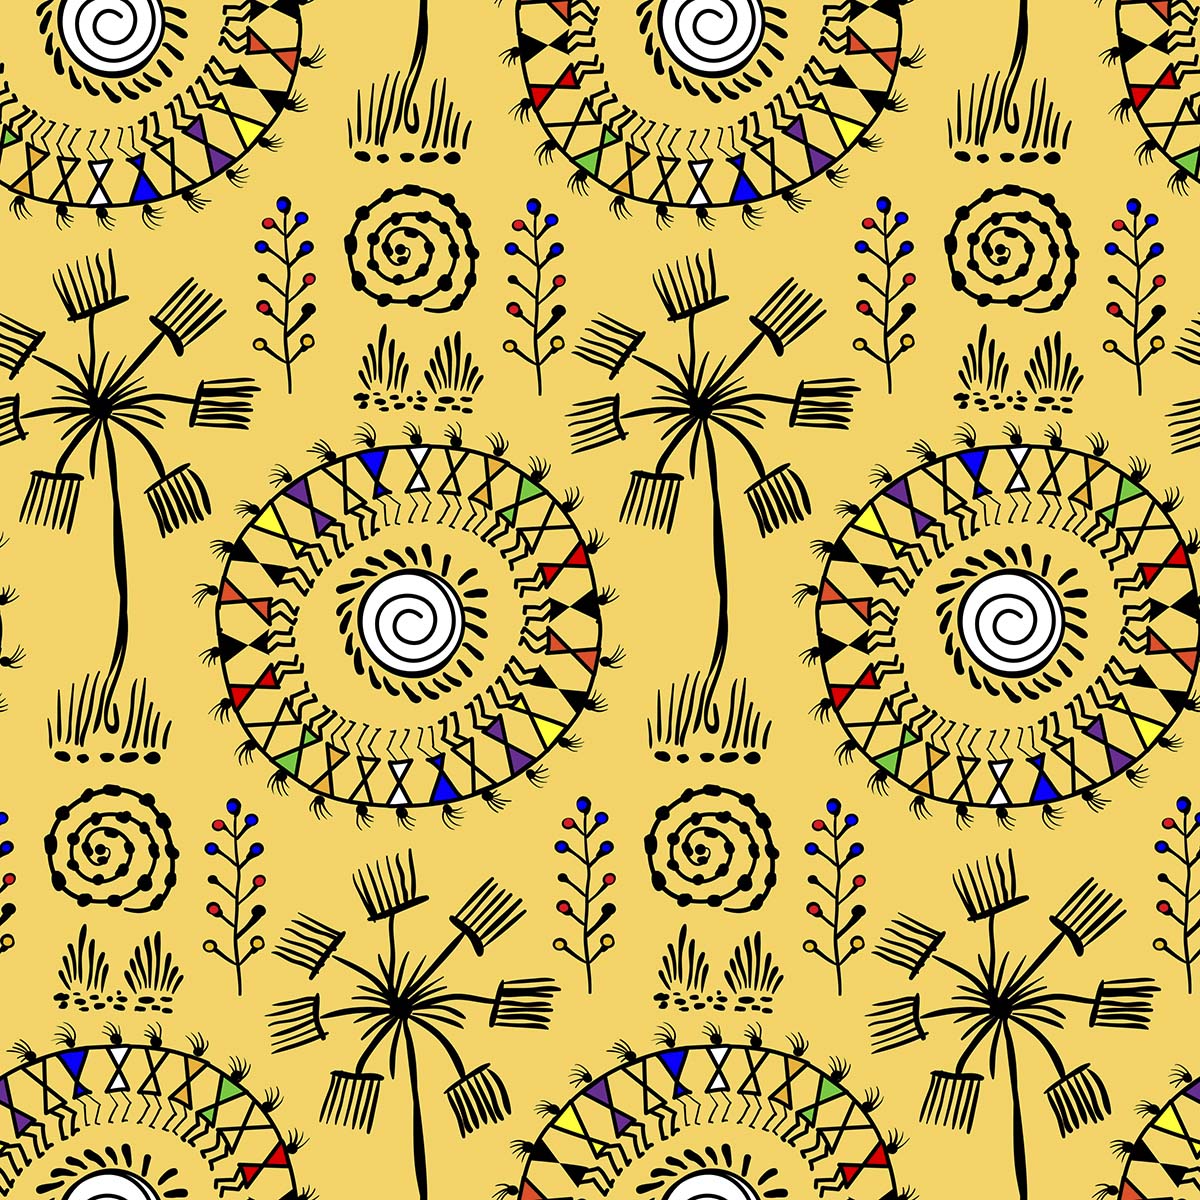 A pattern of black and yellow flowers and spirals